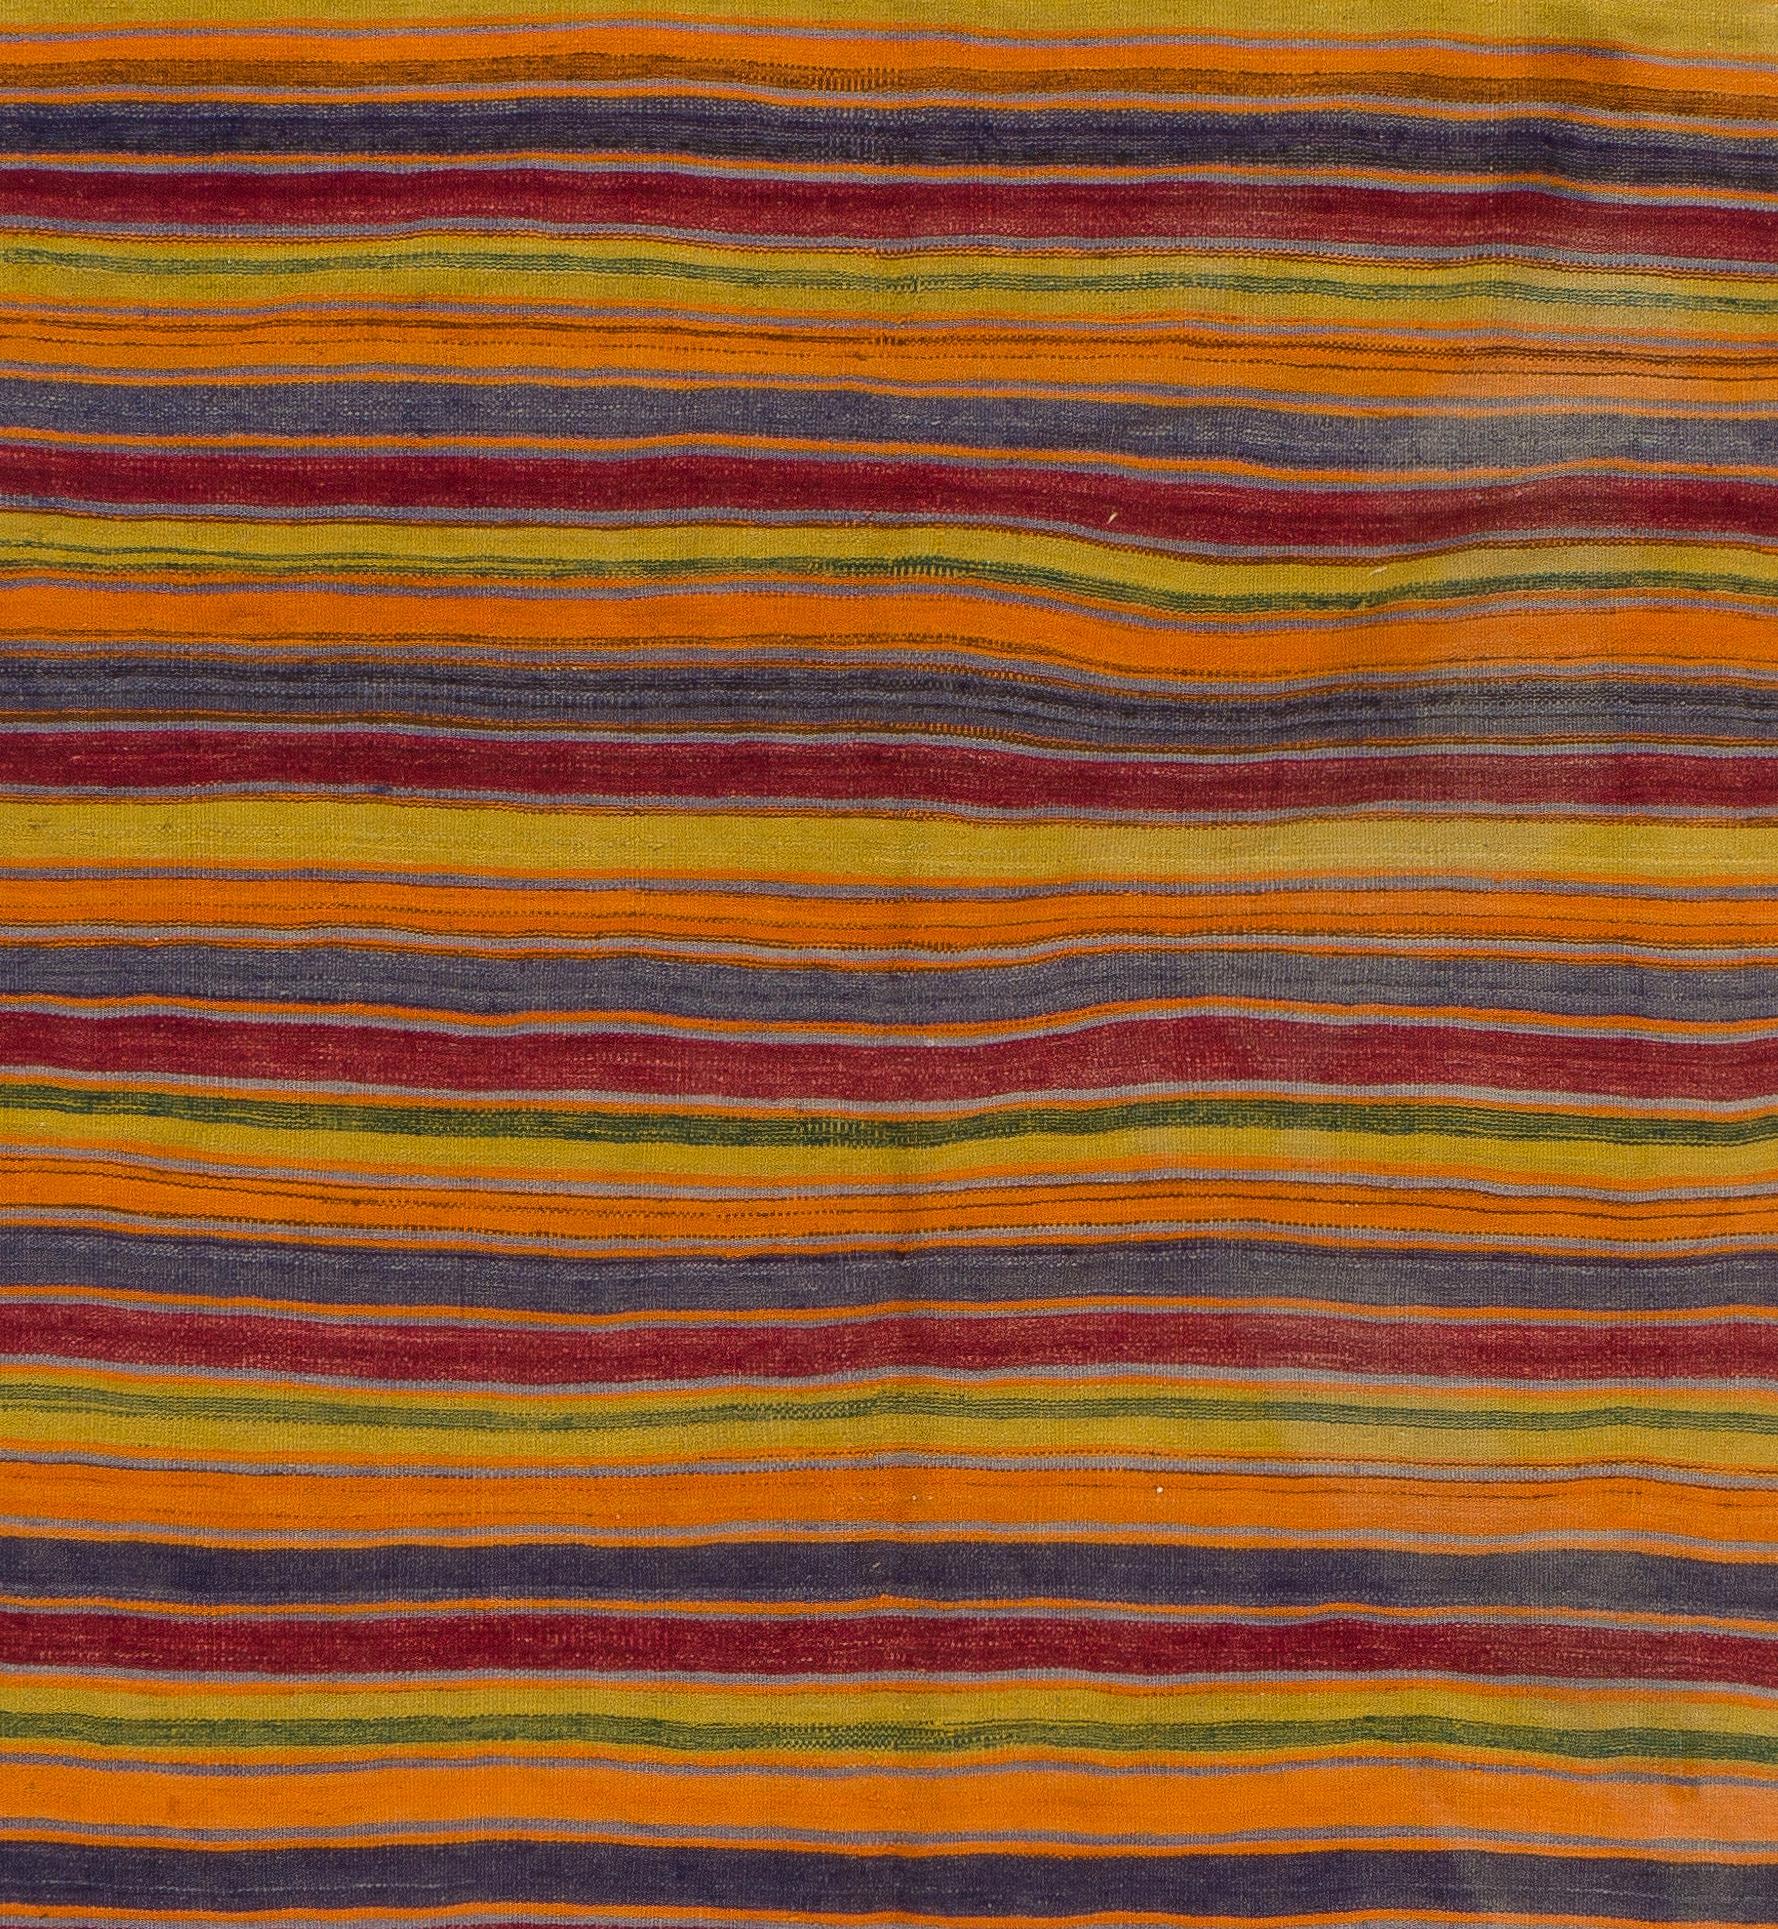 5.8x12.7 Ft Vintage Striped Hand-Woven Anatolian Kilim 'Flat-Weave', 100% Wool In Good Condition For Sale In Philadelphia, PA